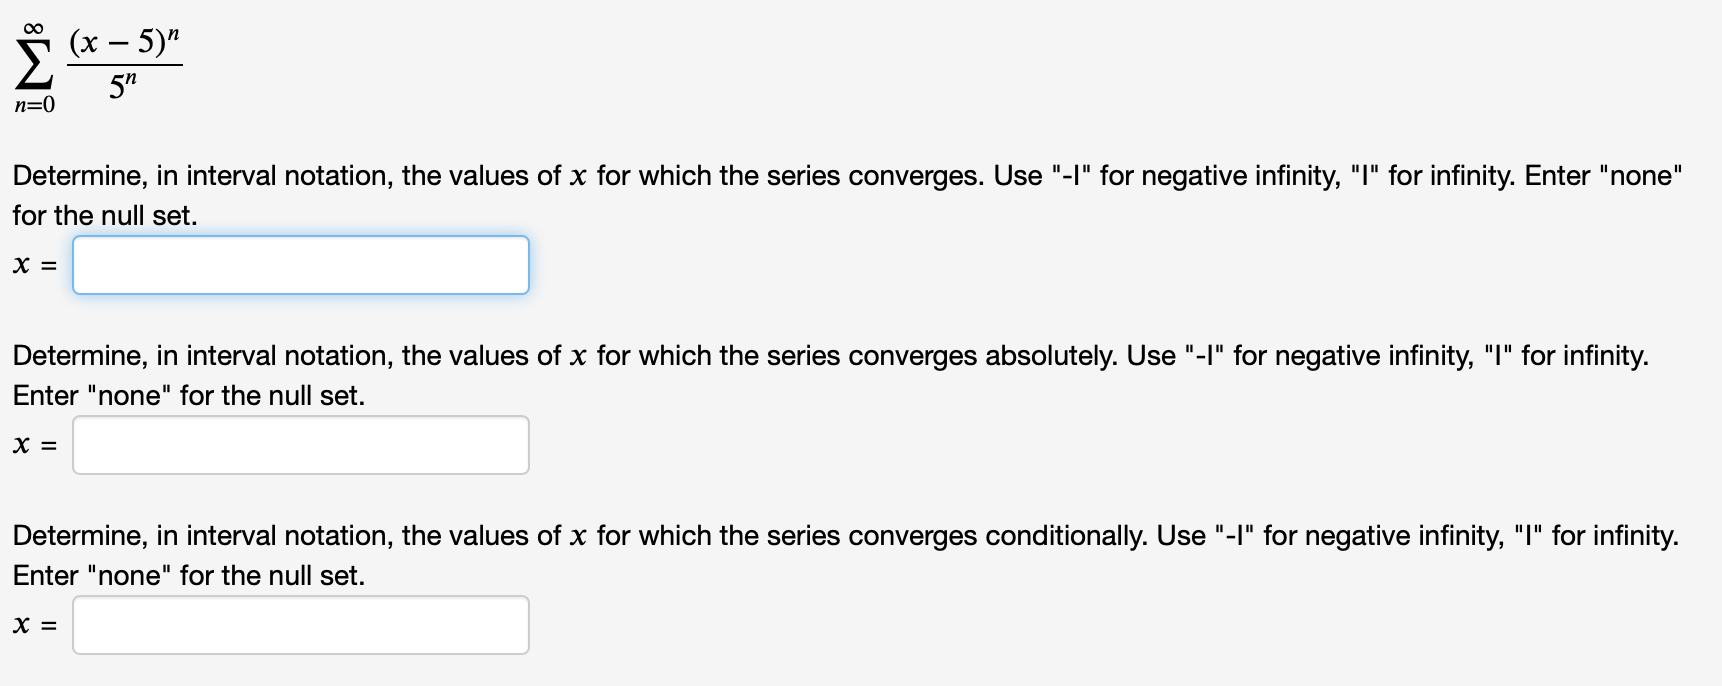 S (x – 5)"
00
5"
n=0
Determine, in interval notation, the values of x for which the series converges. Use "-I" for negative infinity, "I" for infinity. Enter "none"
for the null set.
х ‑
Determine, in interval notation, the values of x for which the series converges absolutely. Use "-I" for negative infinity, "I" for infinity.
Enter "none" for the null set.
х 3
Determine, in interval notation, the values of x for which the series converges conditionally. Use "-I" for negative infinity, "I" for infinity.
Enter "none" for the null set.
х —
